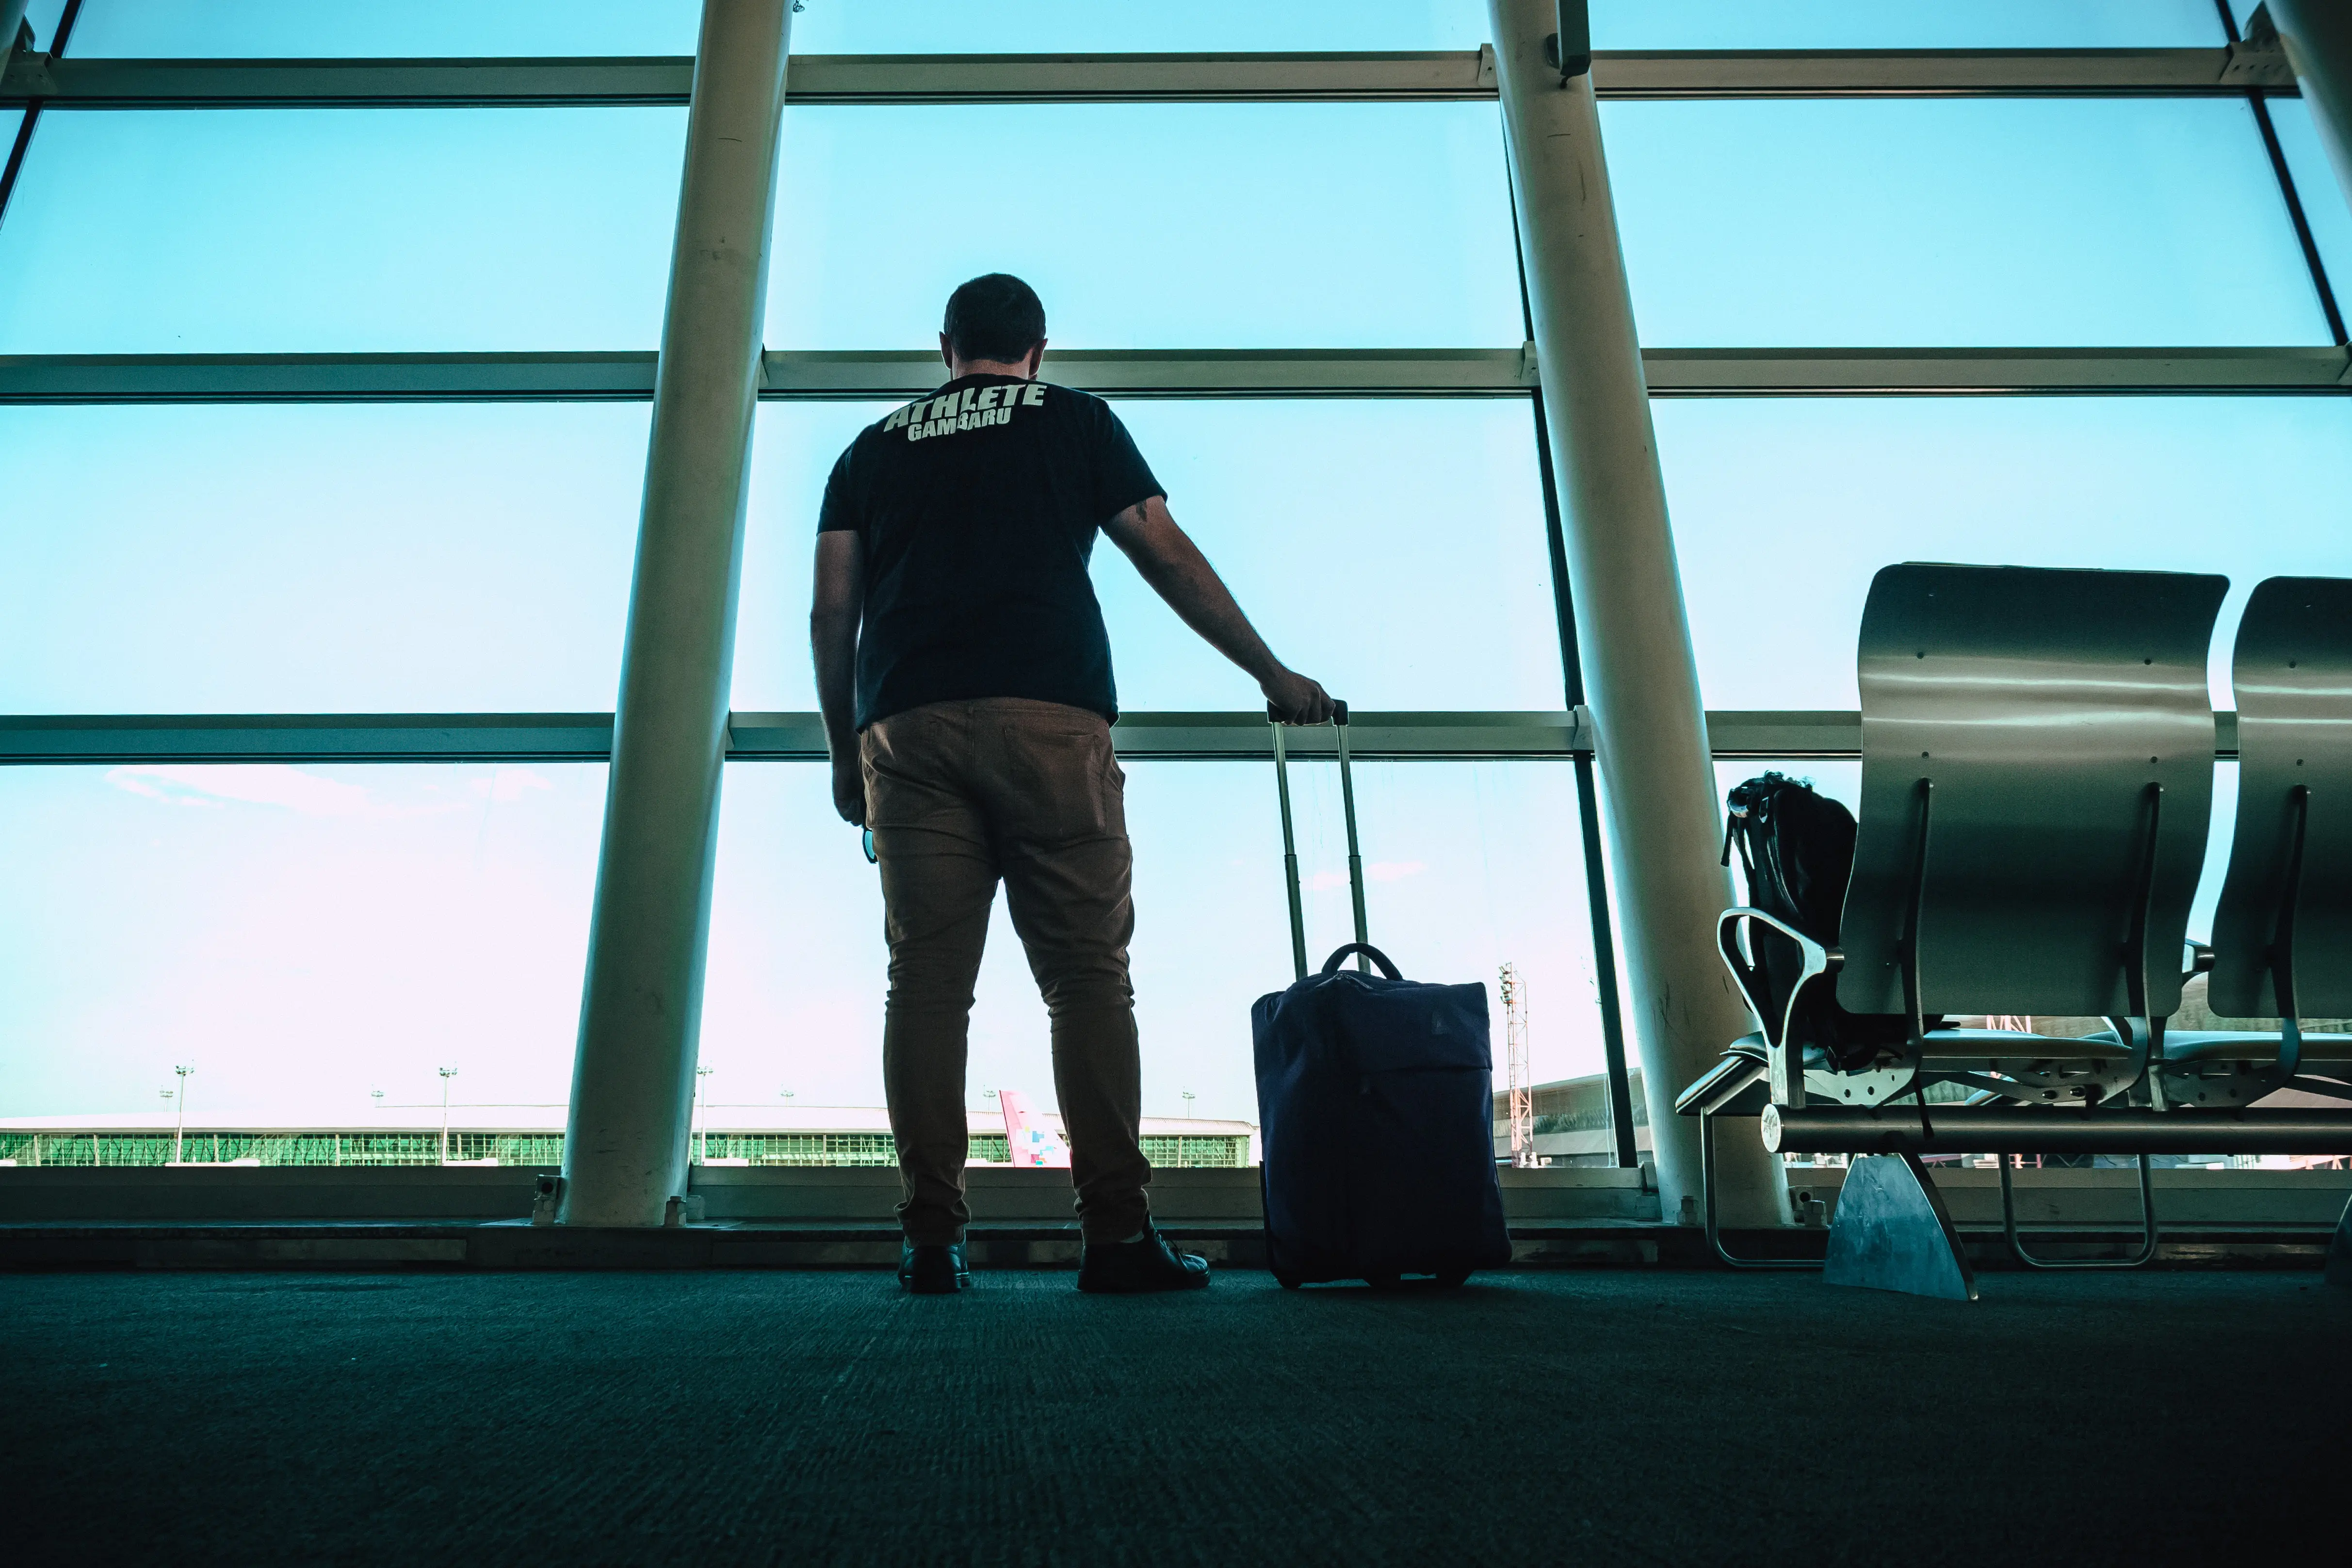 Man waits in front of gate at an airport